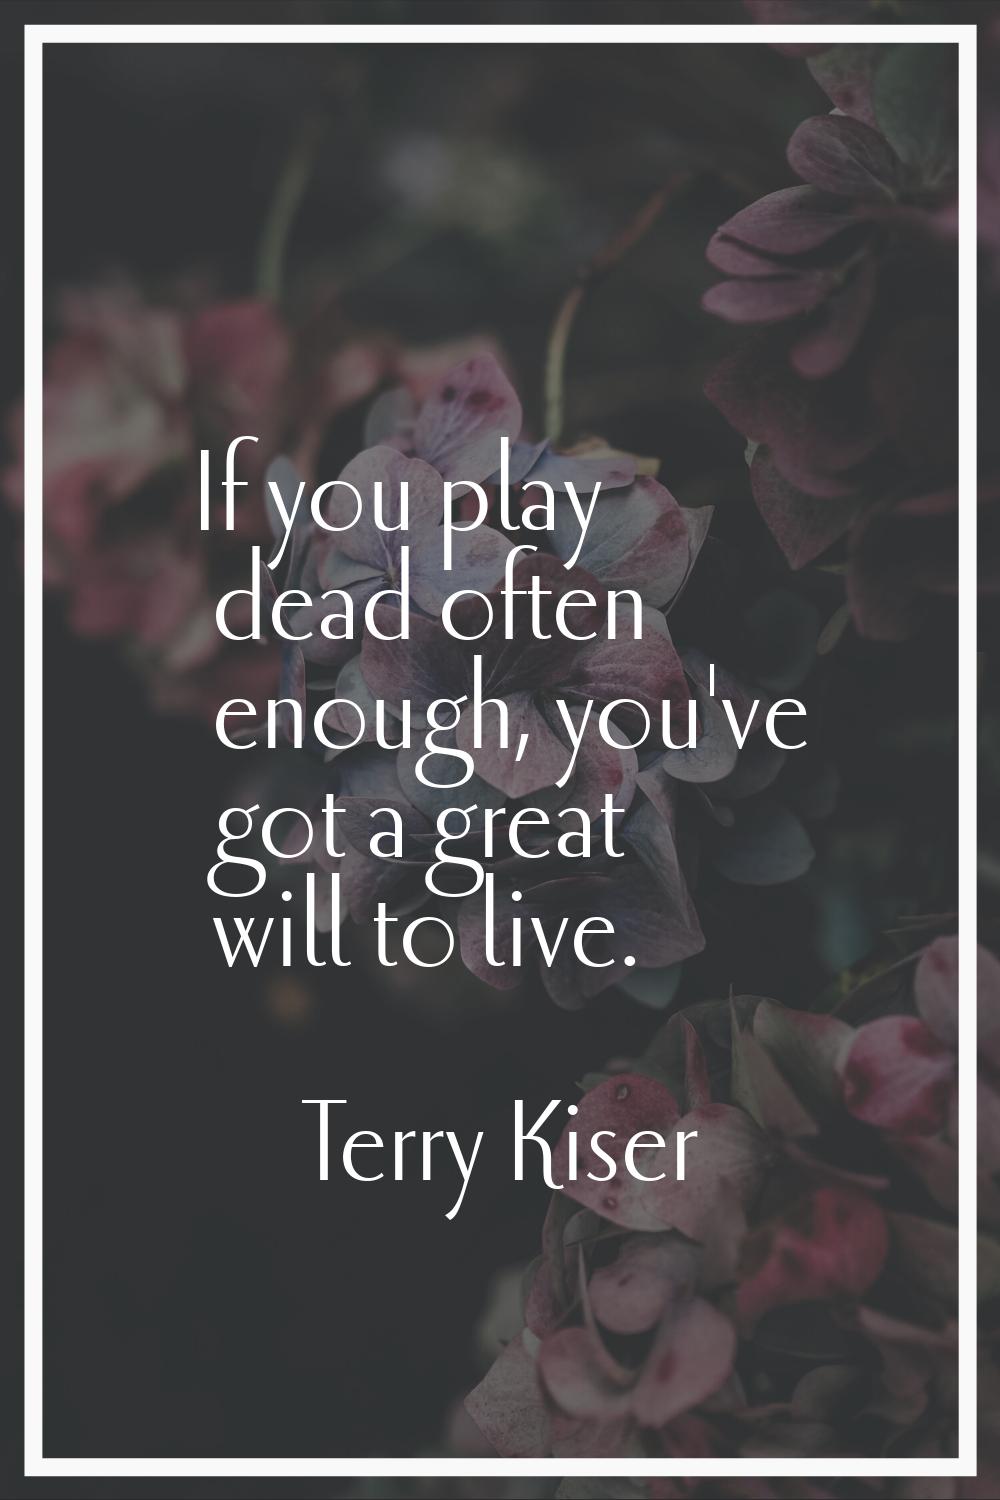 If you play dead often enough, you've got a great will to live.